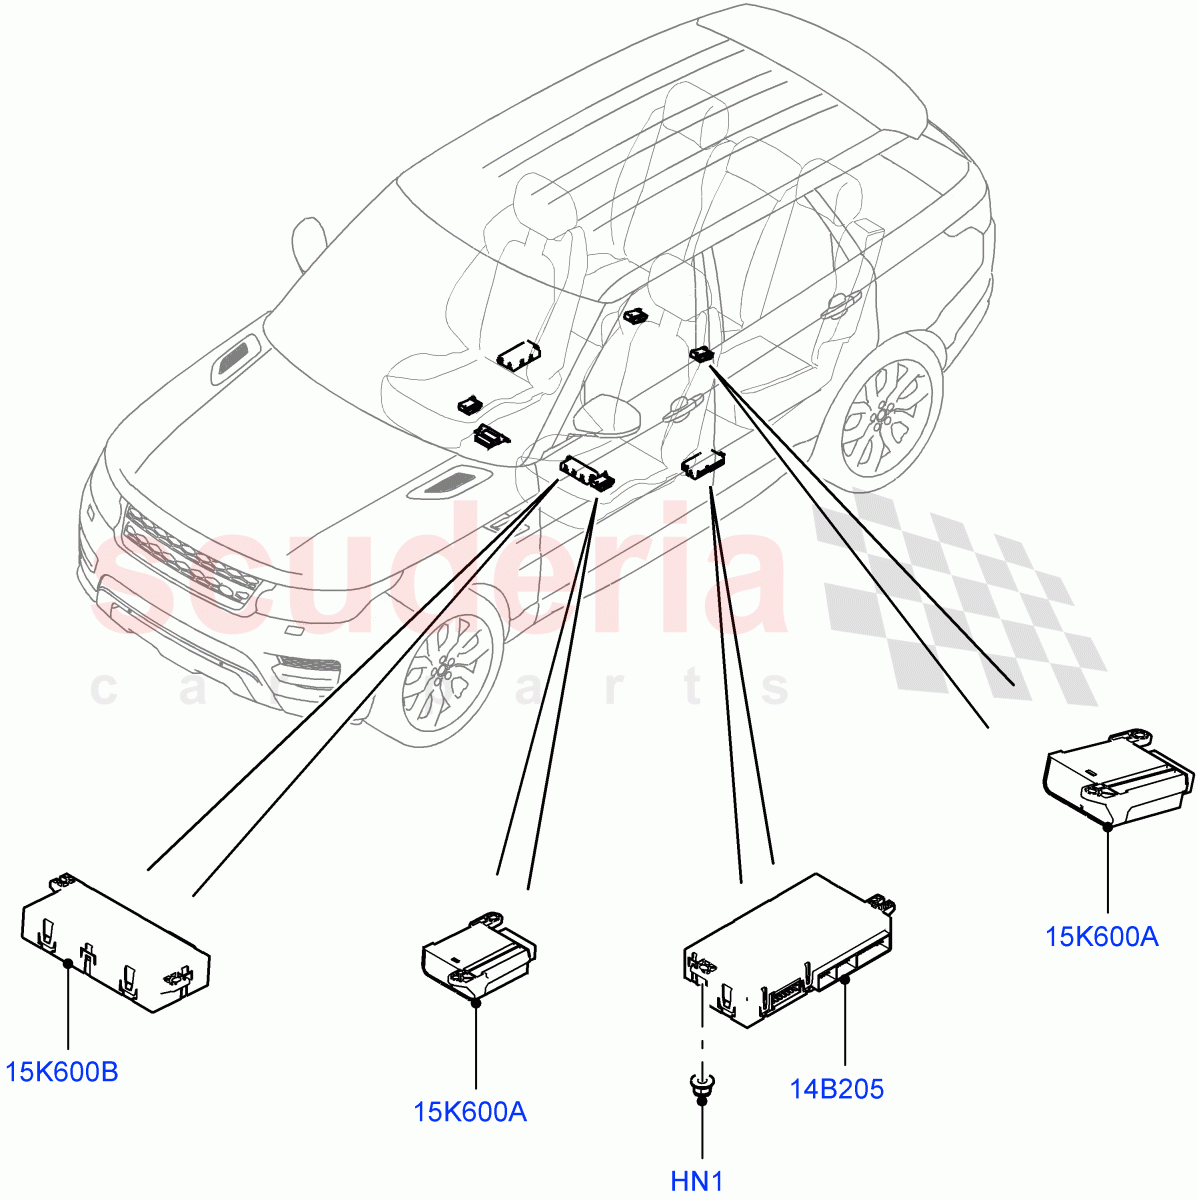 Vehicle Modules And Sensors(Seats) of Land Rover Land Rover Range Rover Sport (2014+) [2.0 Turbo Petrol GTDI]